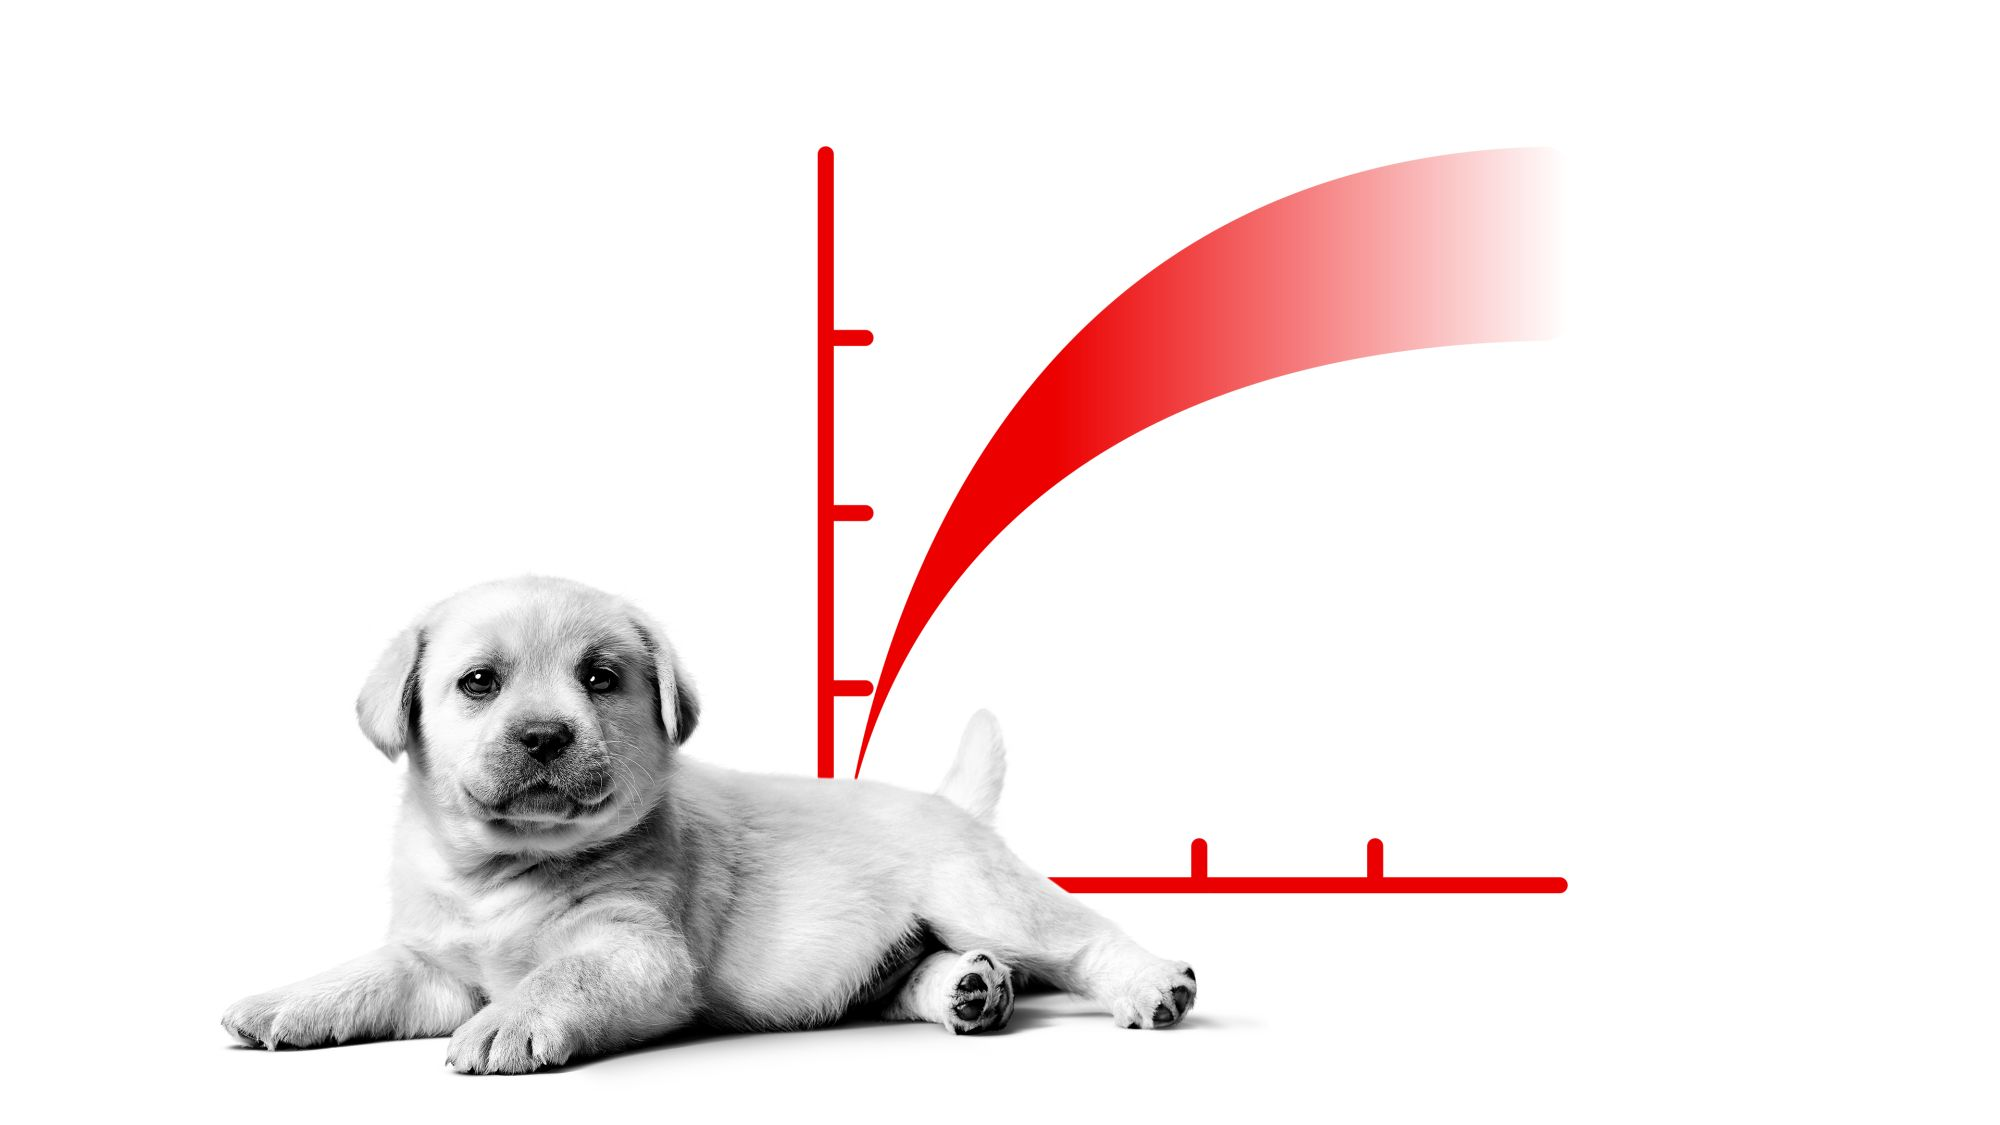 Labrador Retriever puppy in black and white lying down in front of a growth curve illustration